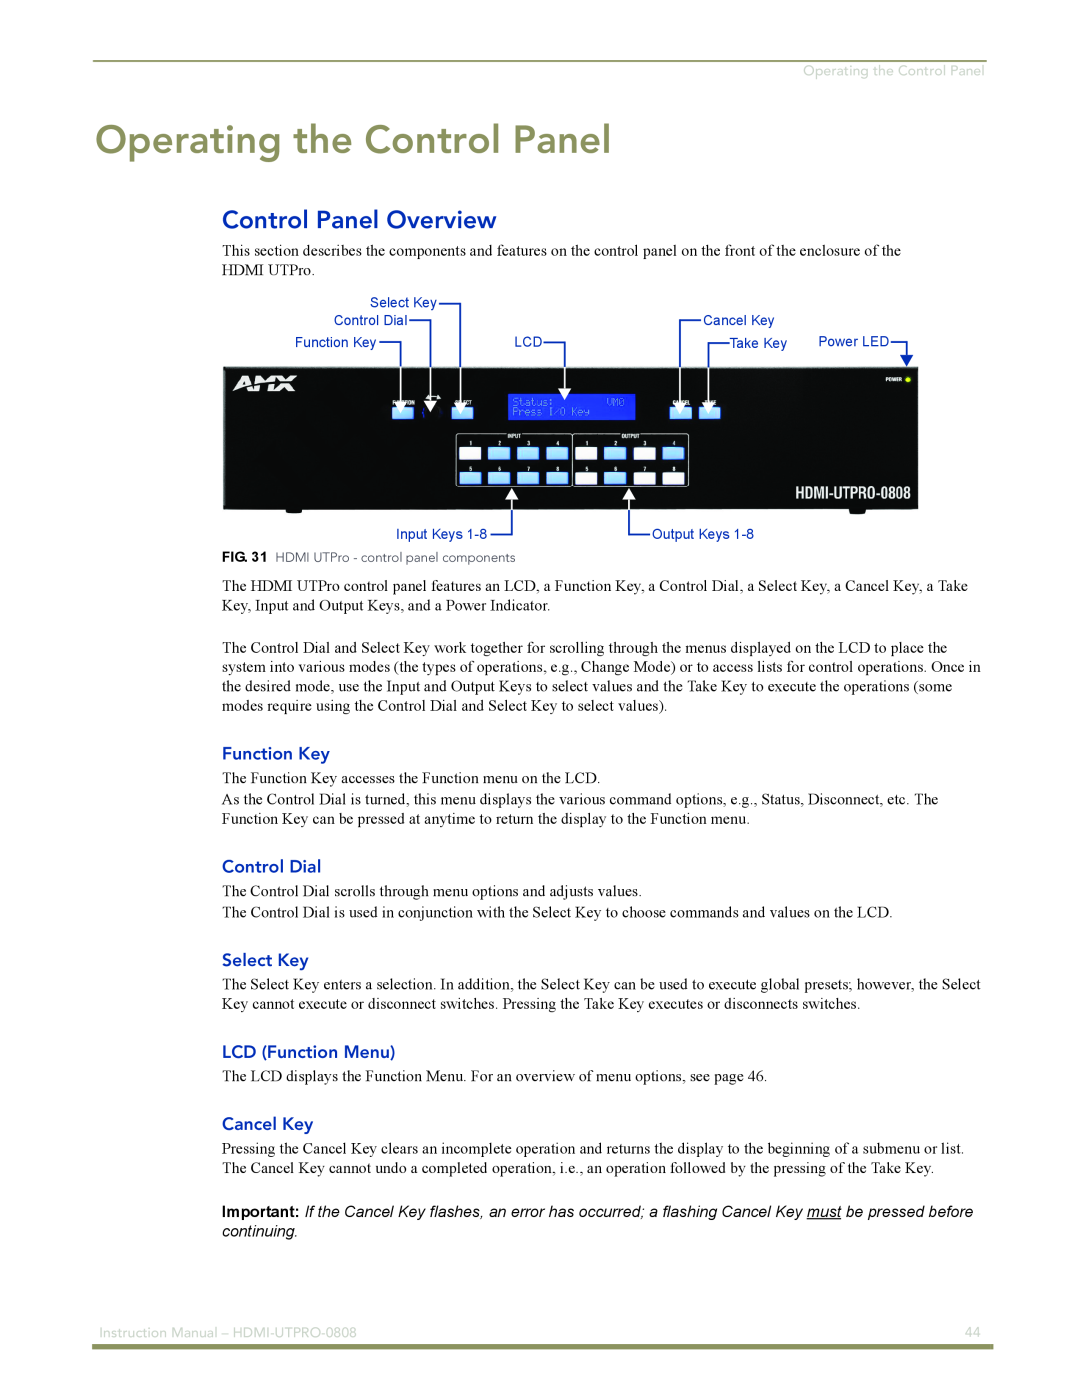 AMX HDMI-UTPRO-0808 instruction manual Operating the Control Panel, Control Panel Overview 